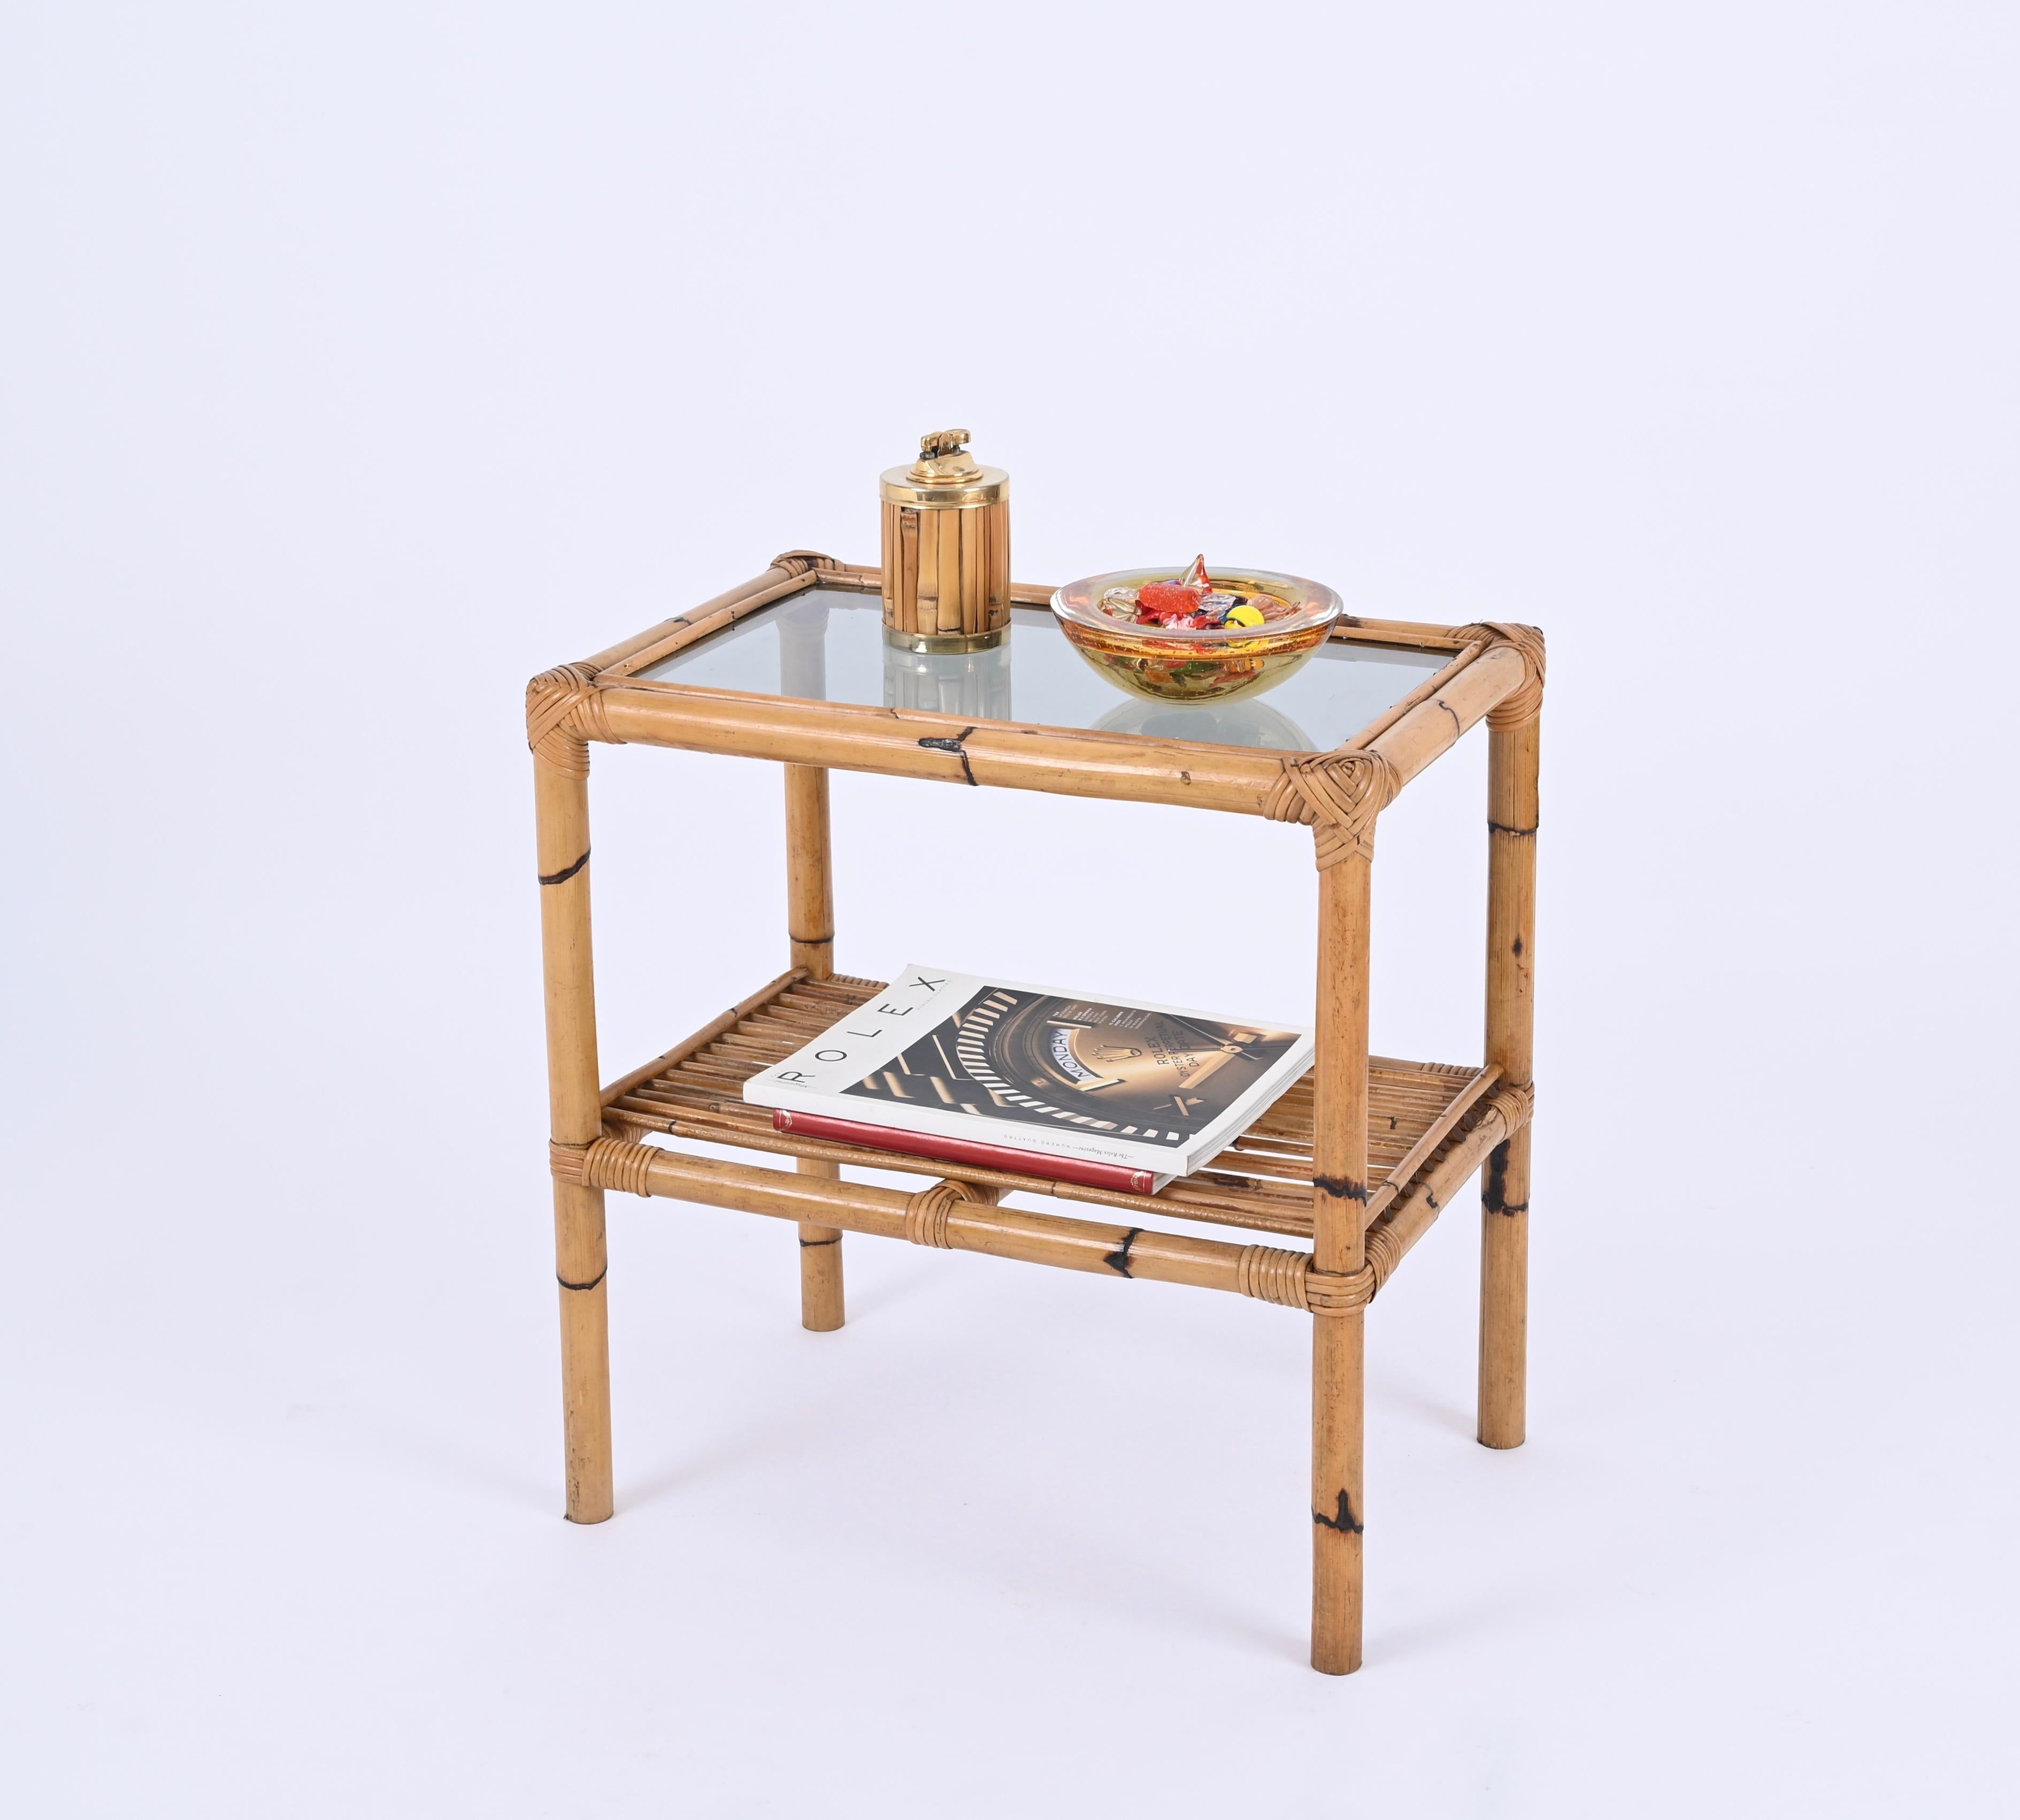 Gorgeous nightstand or side table in bamboo and woven rattan with glass top. This lovely two-tier table was designed in Italy during the 1970s.

This stunning piece is fully handcrafted in bamboo canes and enriched by beautiful hand-woven rattan